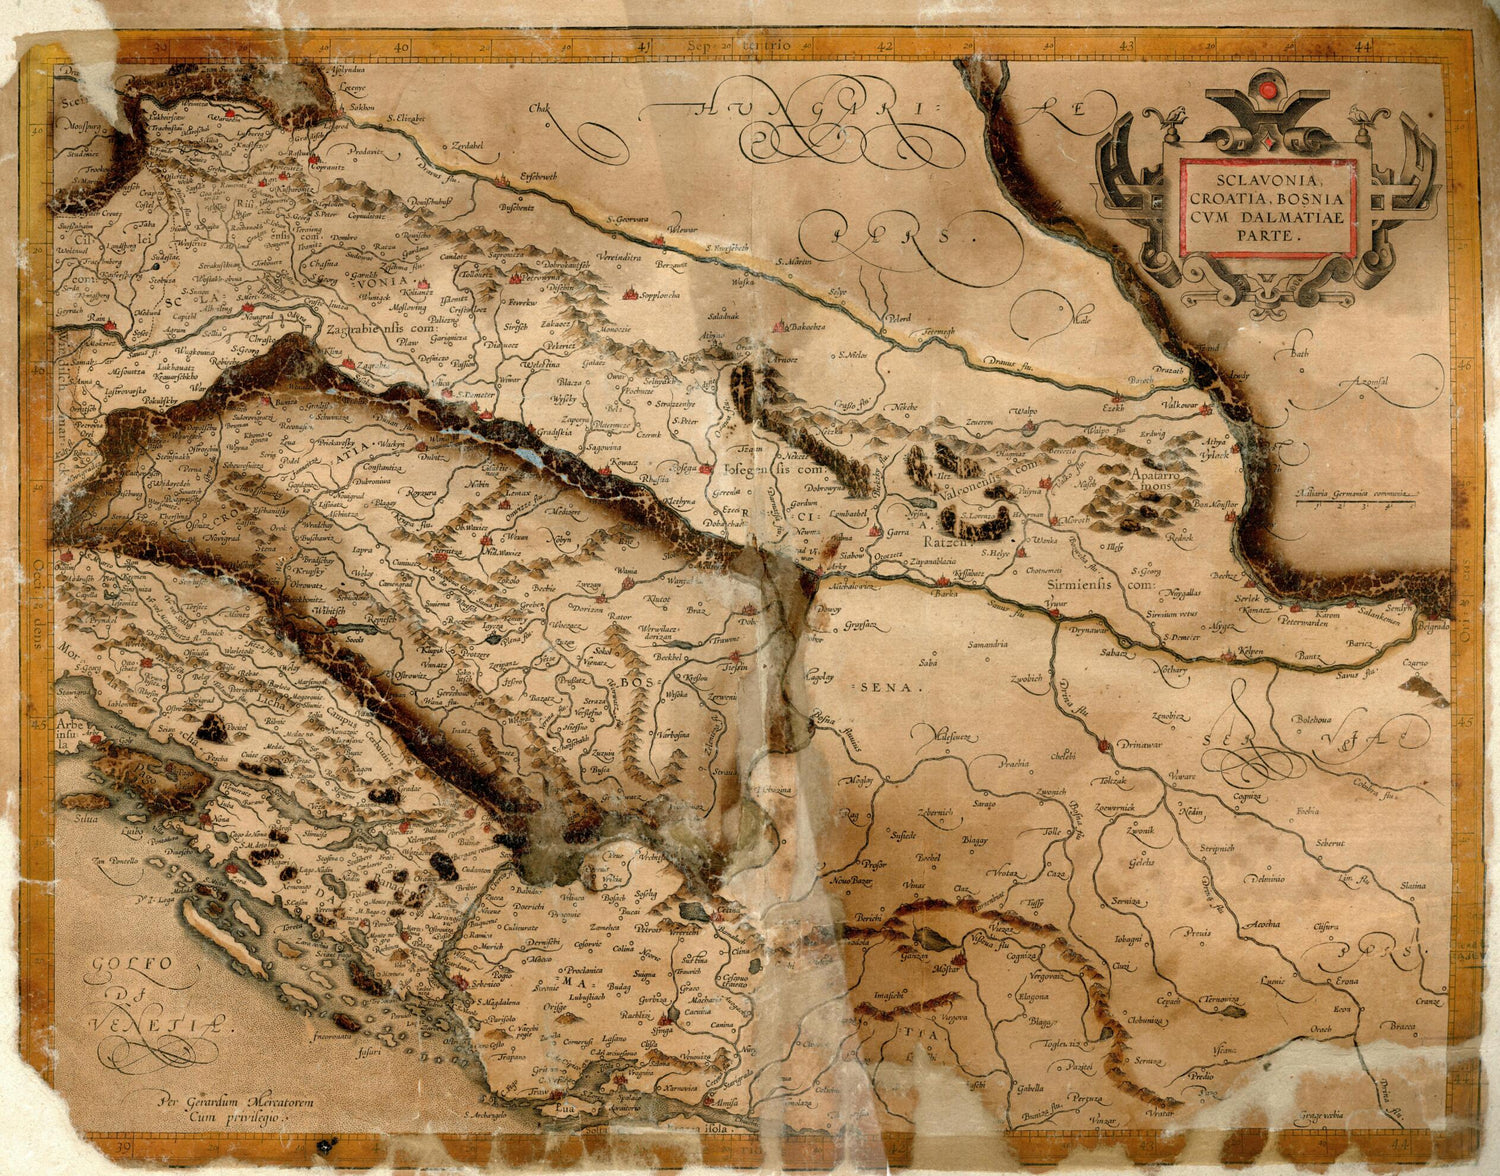 This old map of Slavonia, Croatia, Bosnia, and a Part of Dalmatia. (Sclavonia, Croatia, Bosnia Cum Dalmatiae Parte) from 1590 was created by Gerhard Mercator in 1590